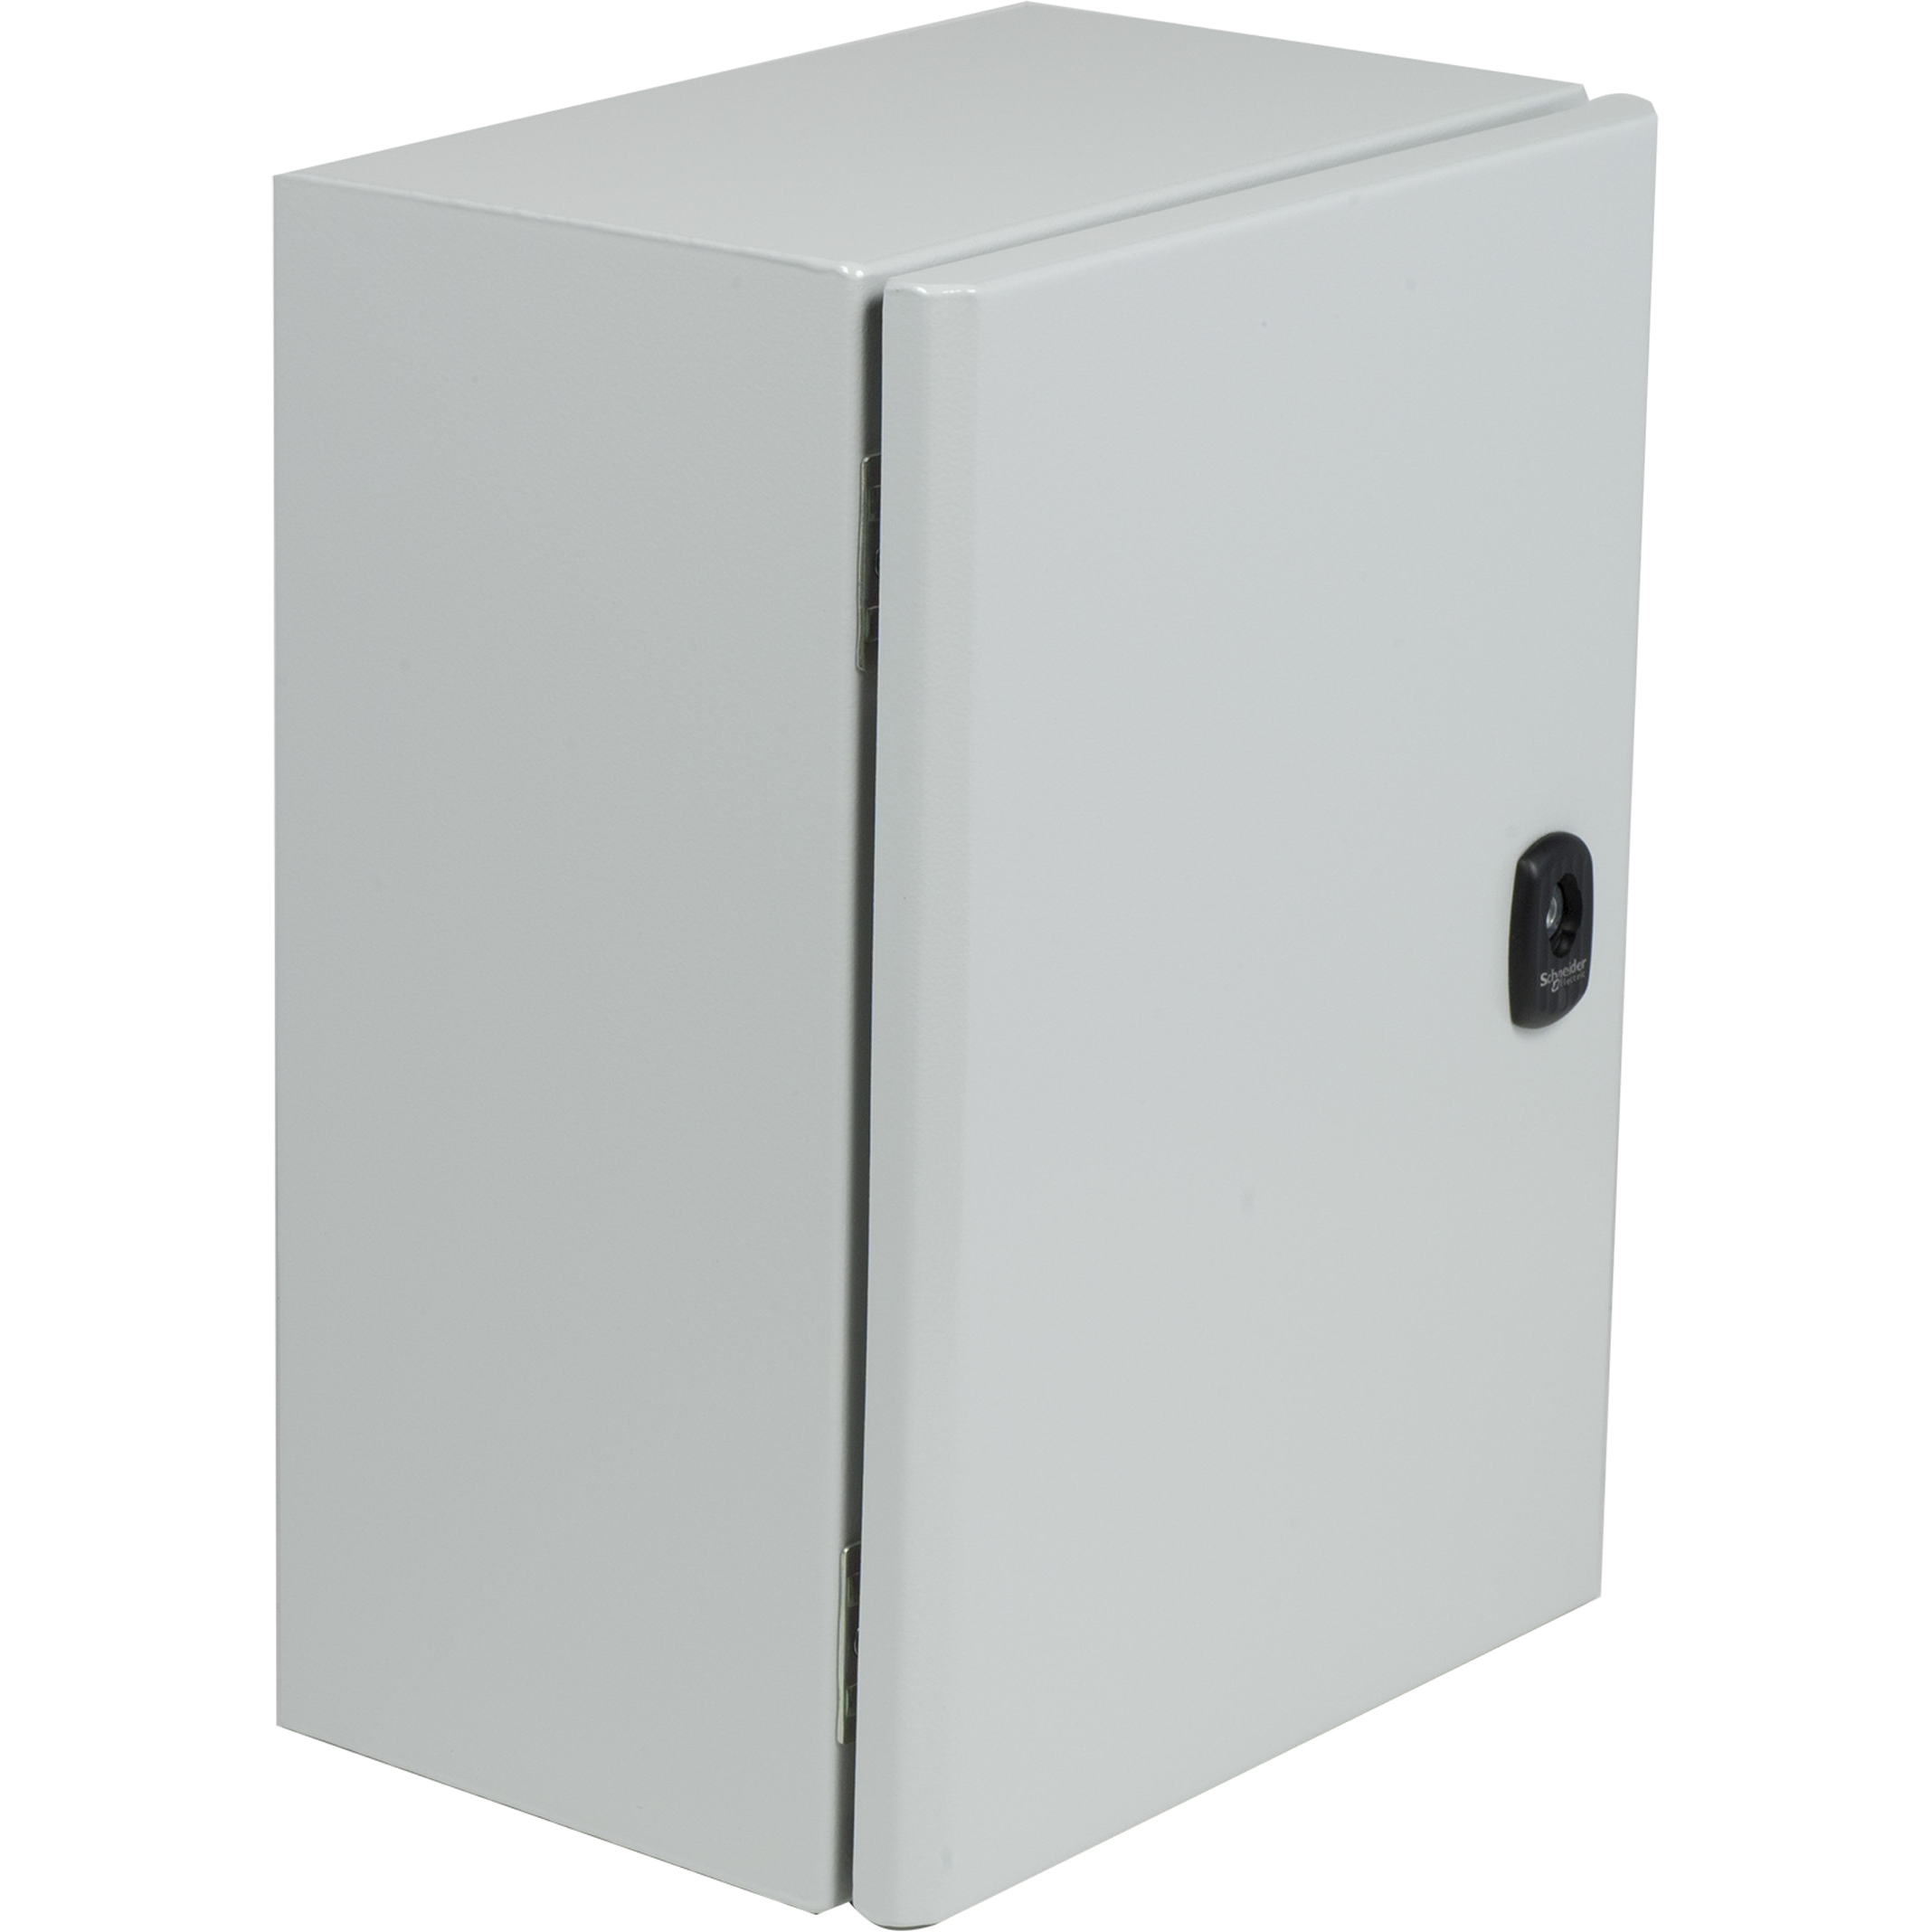 Wall mounted steel enclosure, Spacial S3DC, plain door, without plain chasis, 600x400x200mm, IP66, IK10